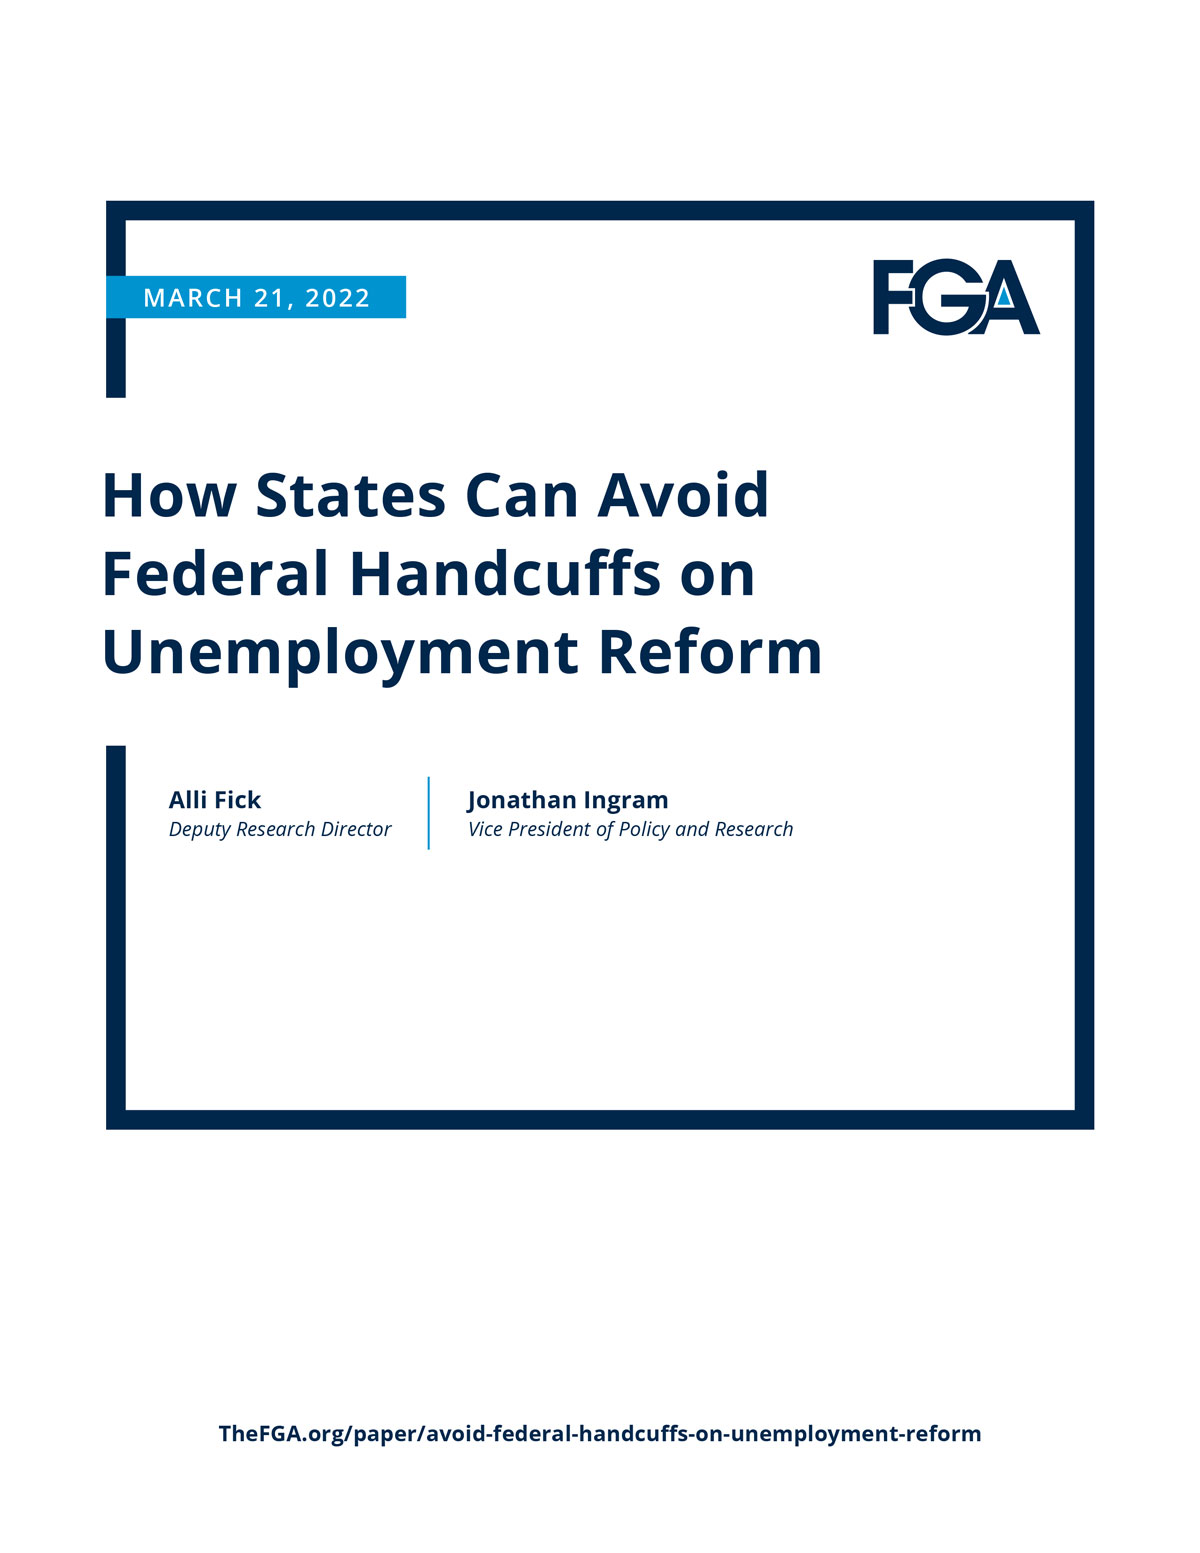 How States Can Avoid Federal Handcuffs on Unemployment Reform